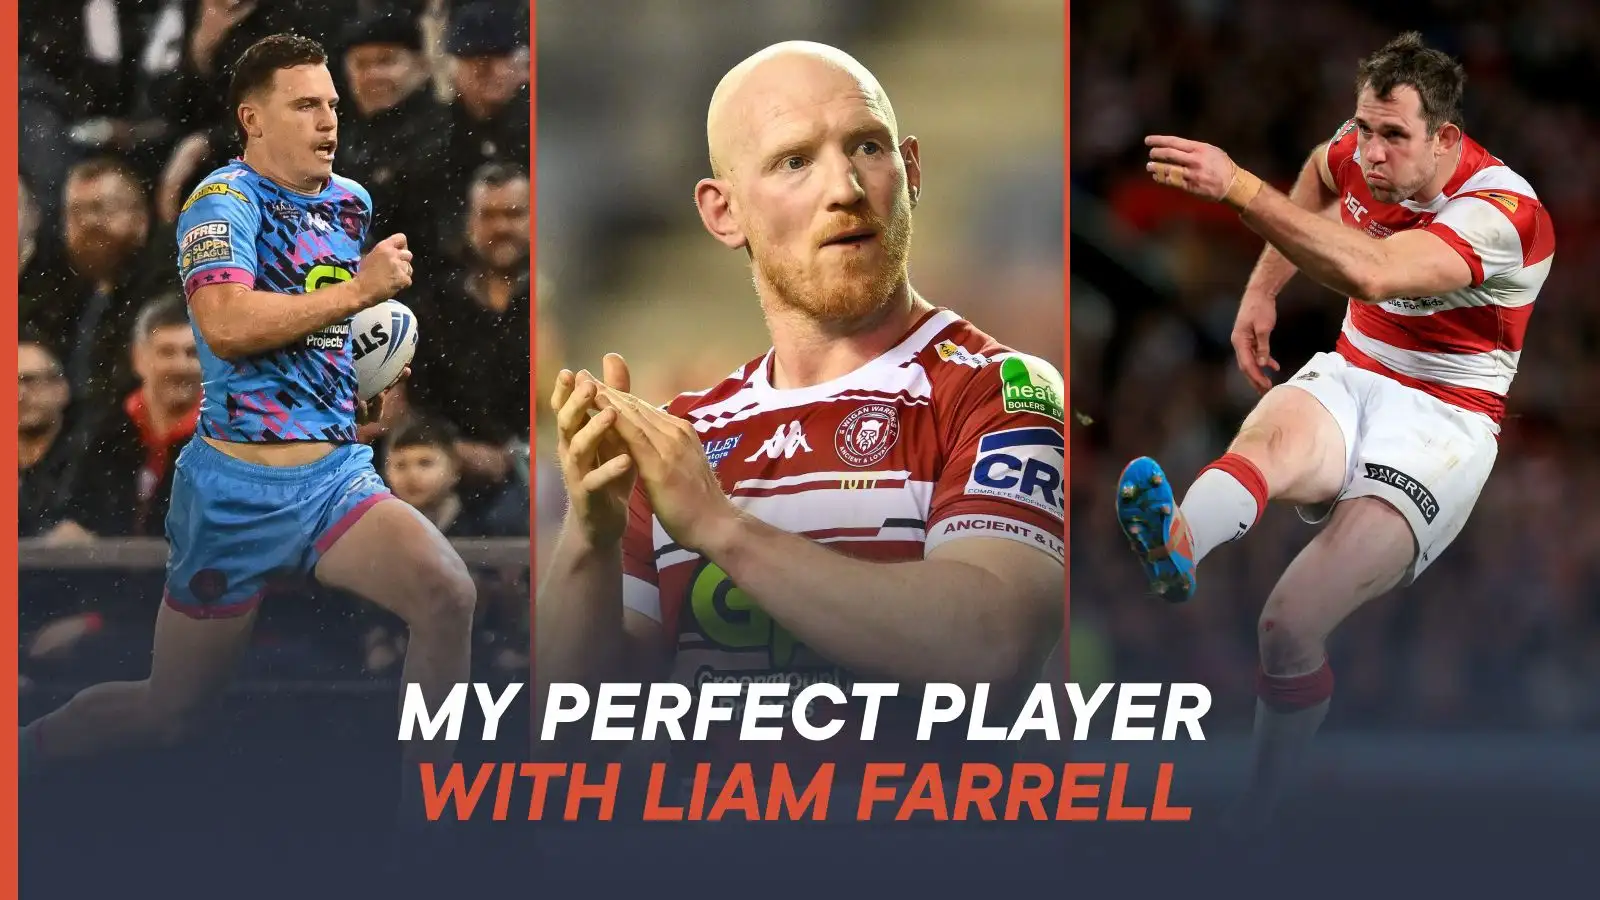 Liam Farrell builds perfect player with best tackler, quickest player and more key attributes